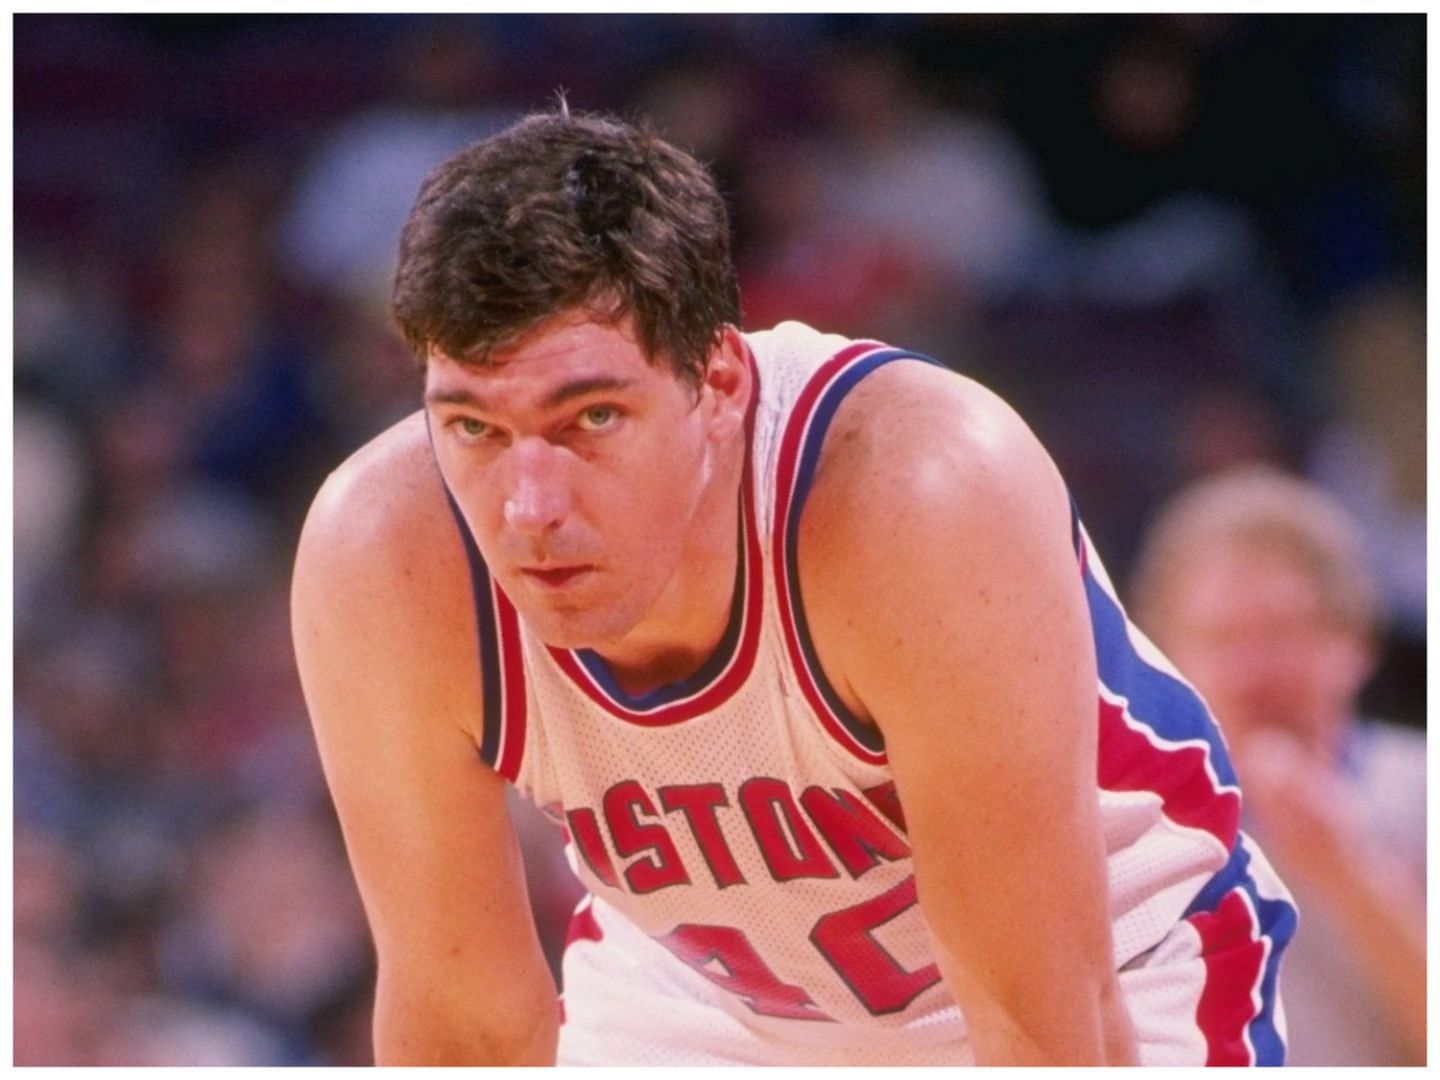 Bill Laimbeer of the Detroit Pistons